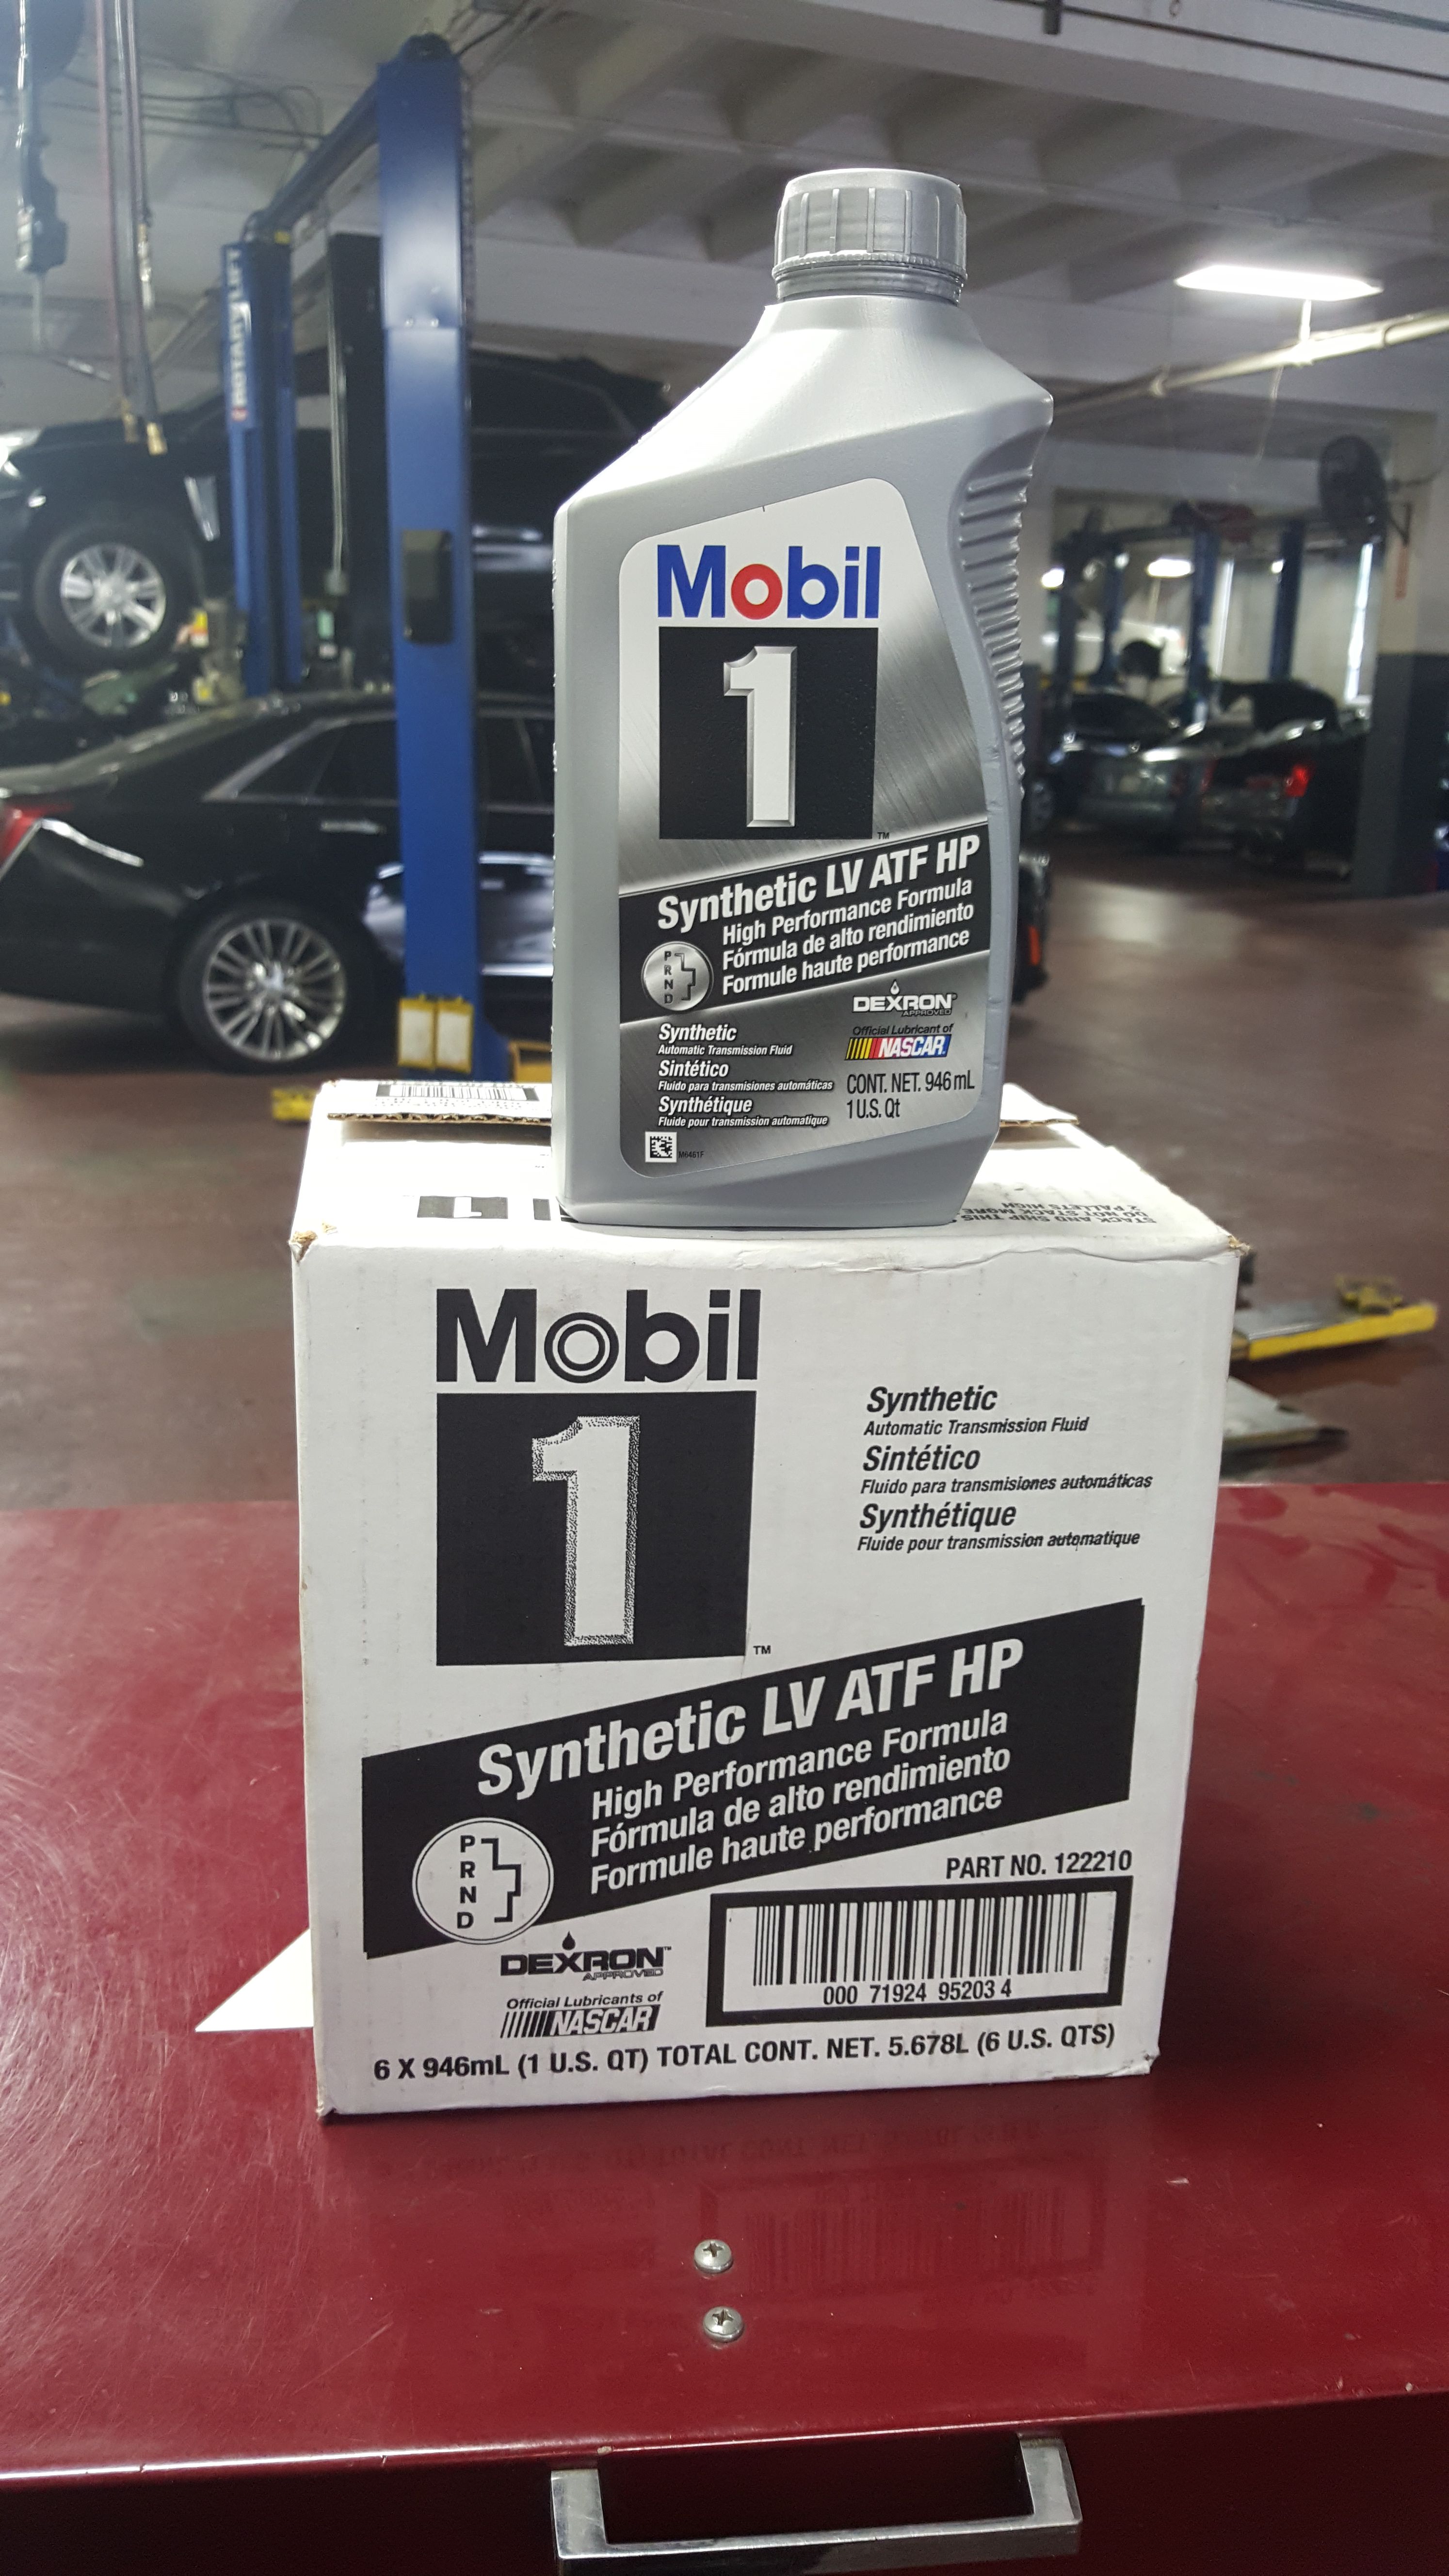 Mobile 1 Synthetic LV ATF HP Dexron Fluid for Sale in Hacienda